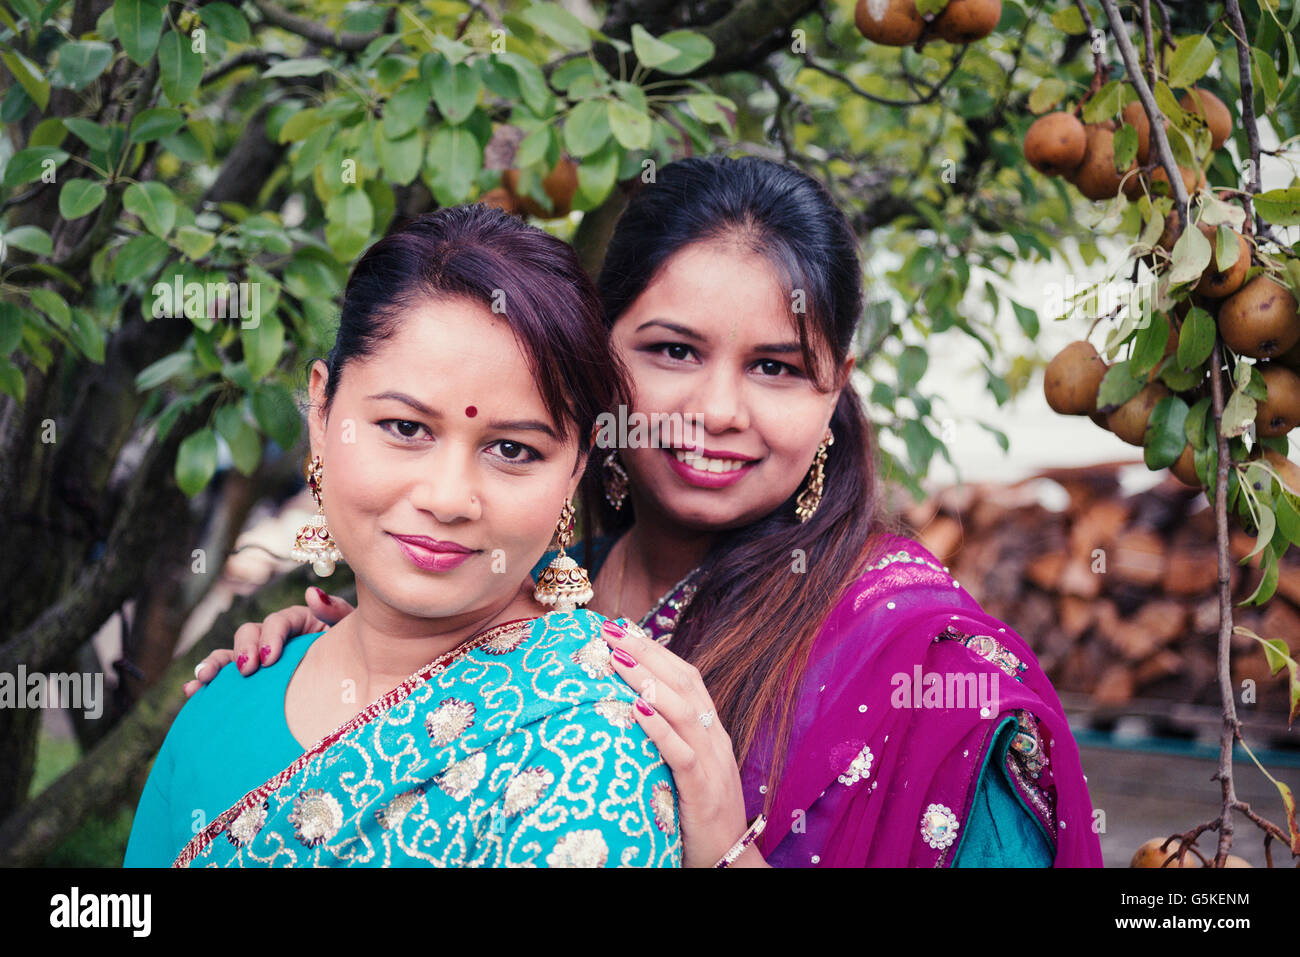 Women wearing traditional Indian dresses in garden Stock Photo